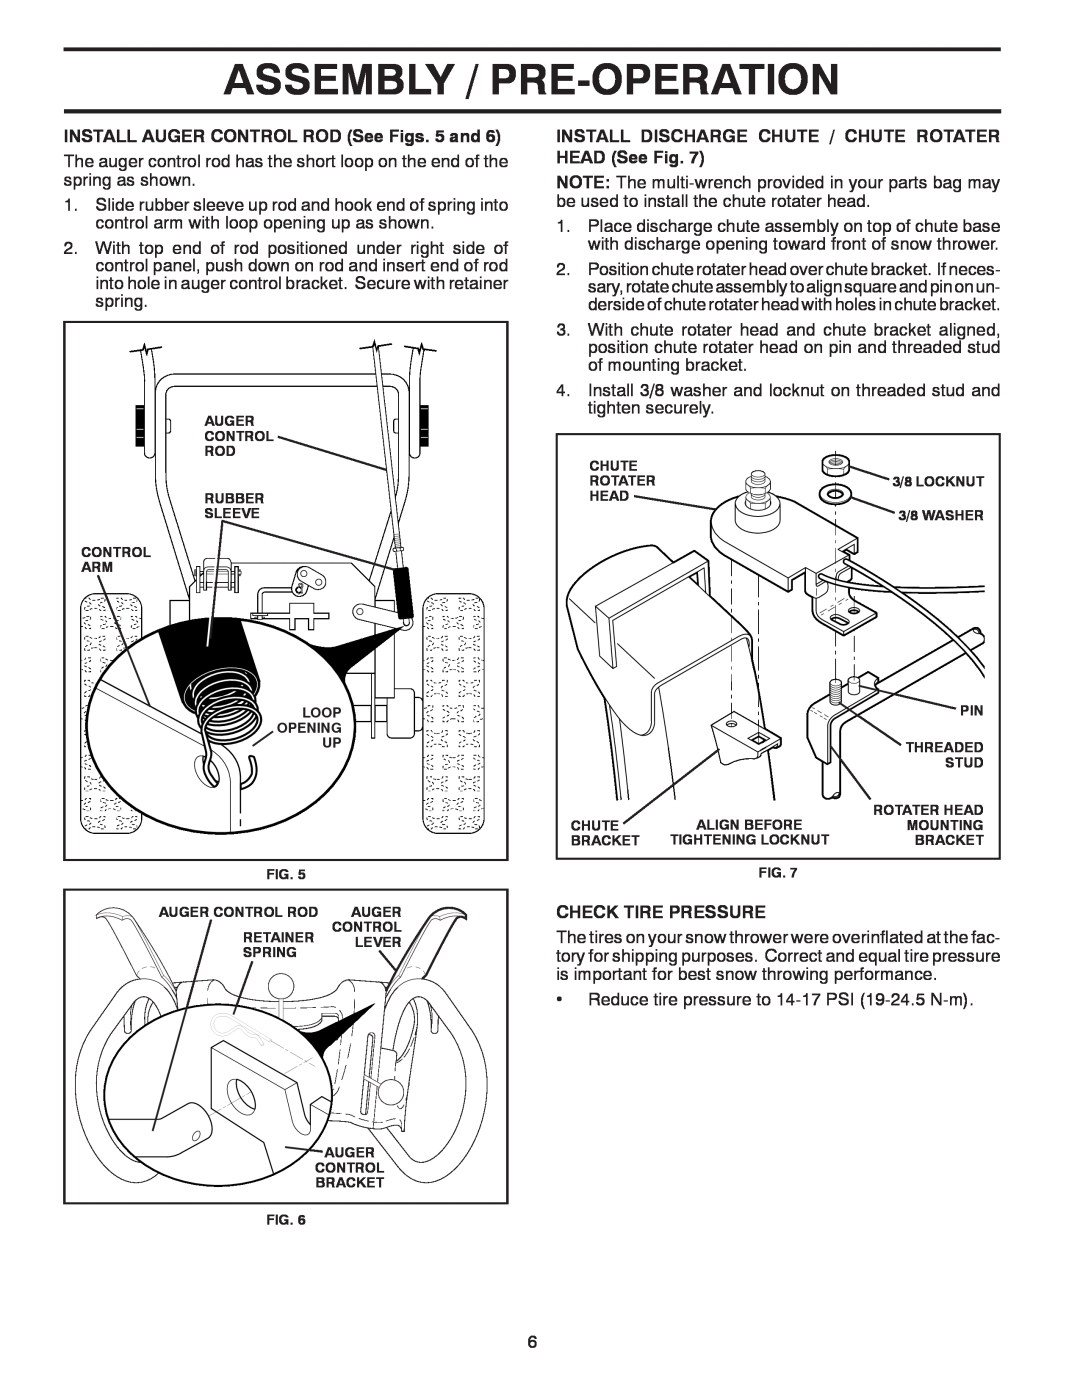 Poulan 424003 owner manual Assembly / Pre-Operation, INSTALL AUGER CONTROL ROD See Figs. 5 and, Check Tire Pressure 